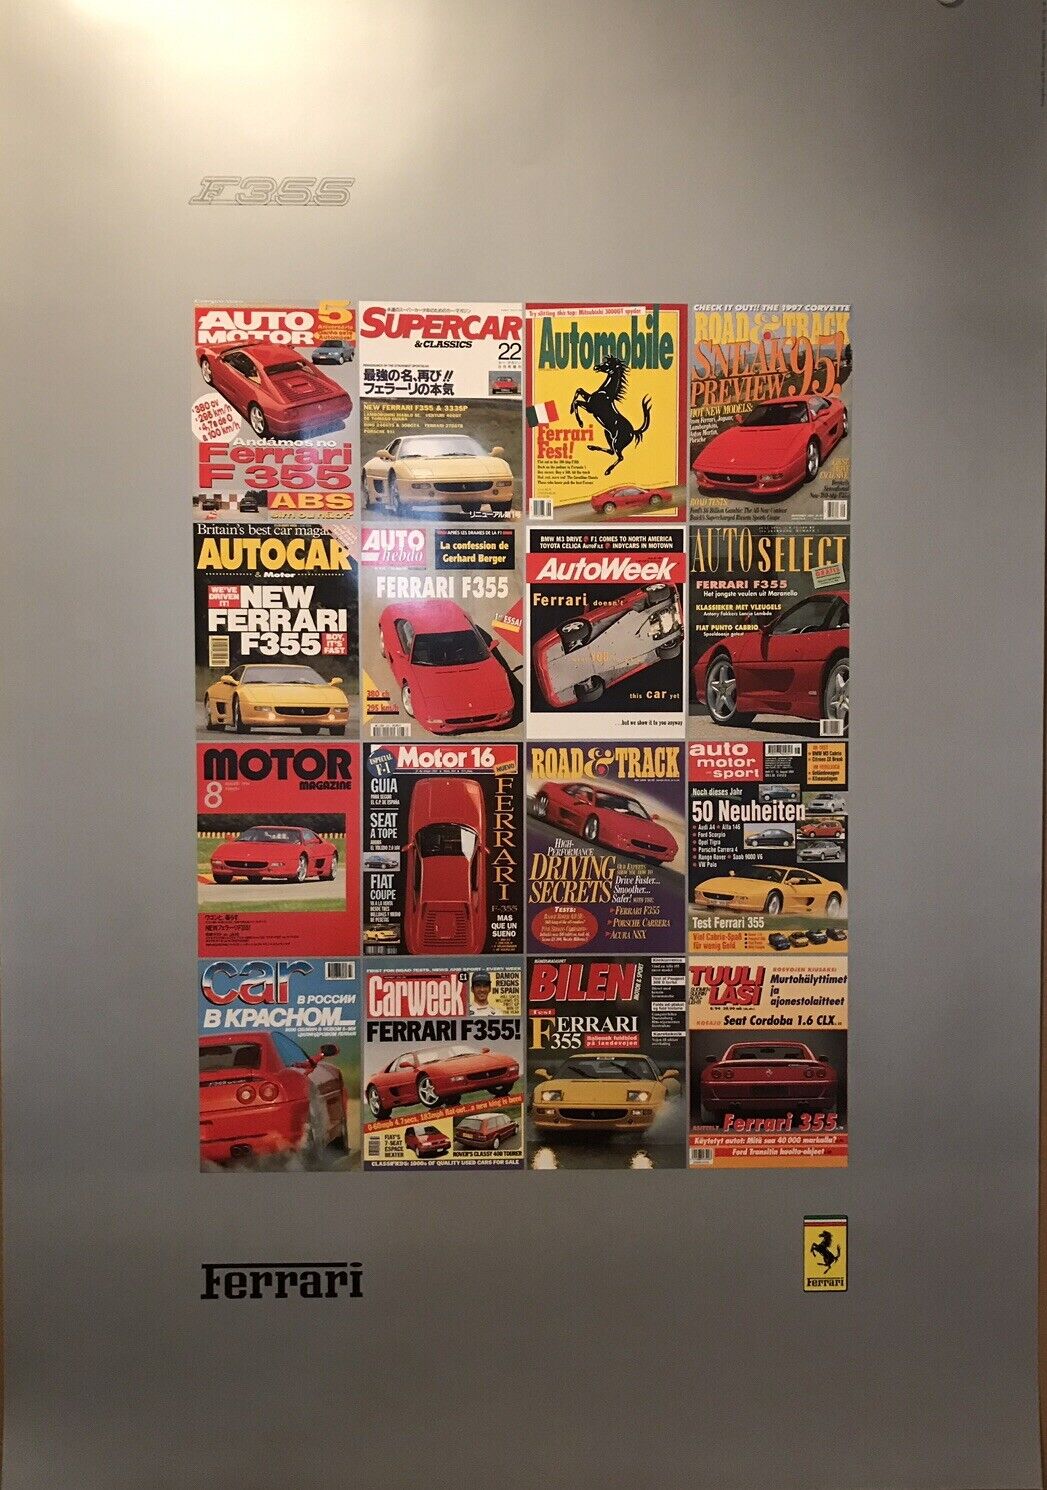 Ferrari F355 Magazine Covers Factory Car Poster Extremely Rare 1st On eBay 😁